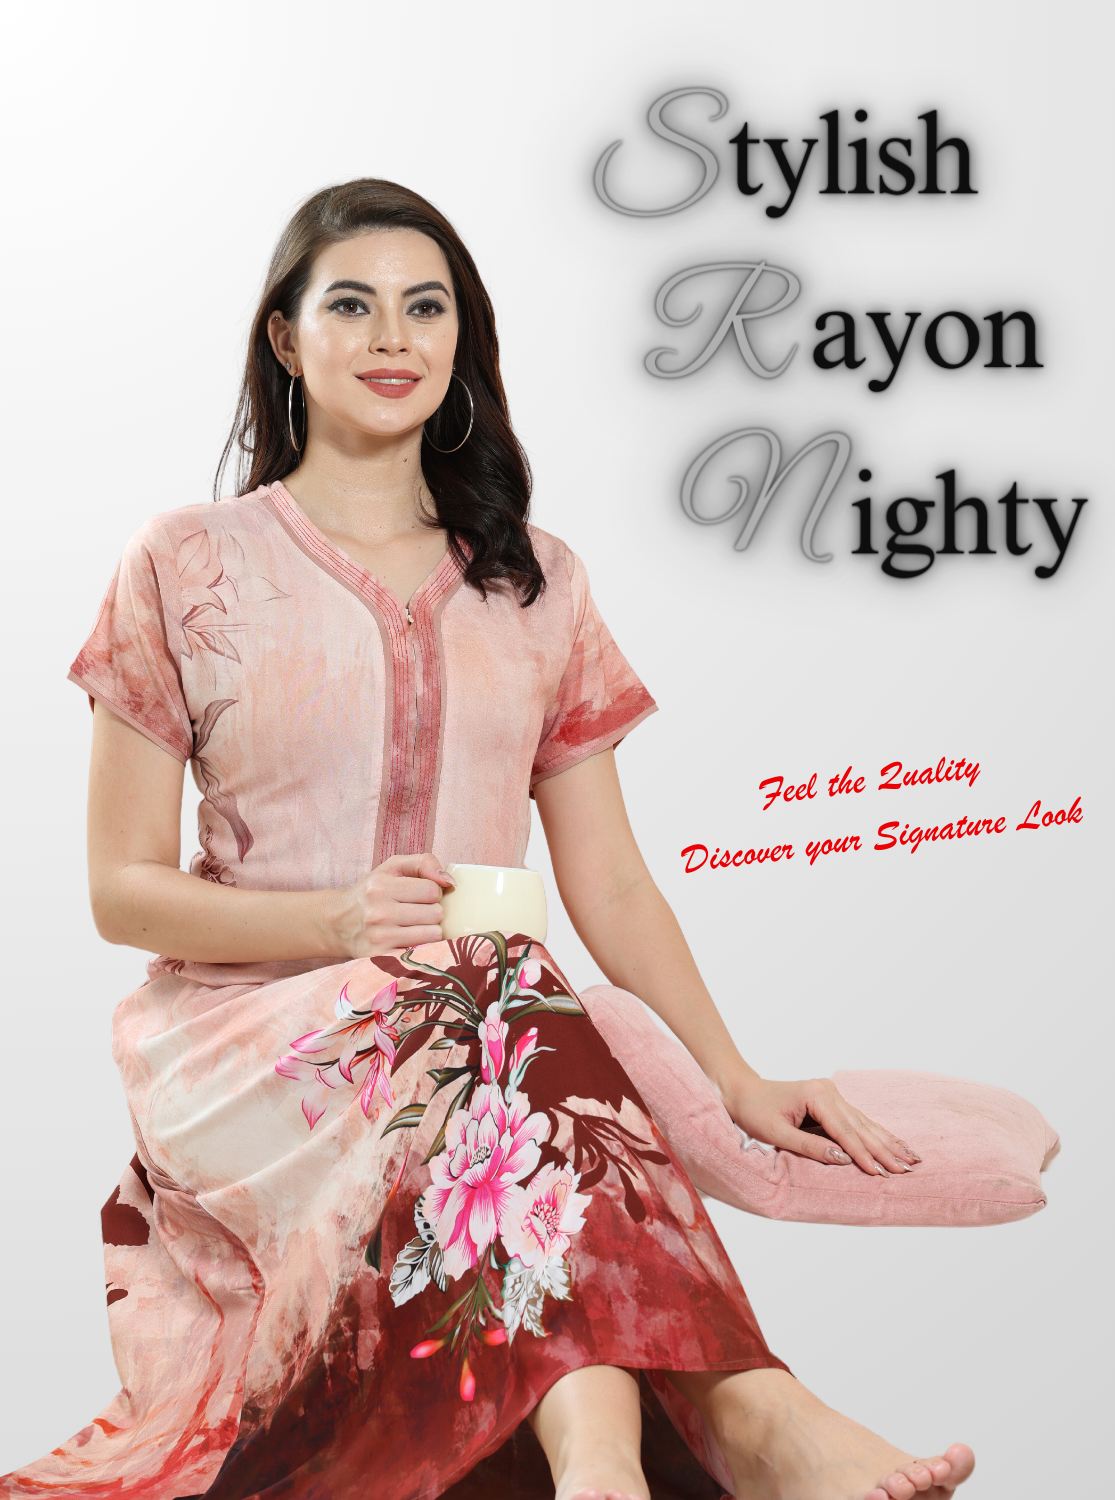 MANGAI Rayon Digital Printed Stylish Nighties for Stylish Women's | Updated Collections | Superior Quality | All Over Printed |Trendy Nighties for Women's